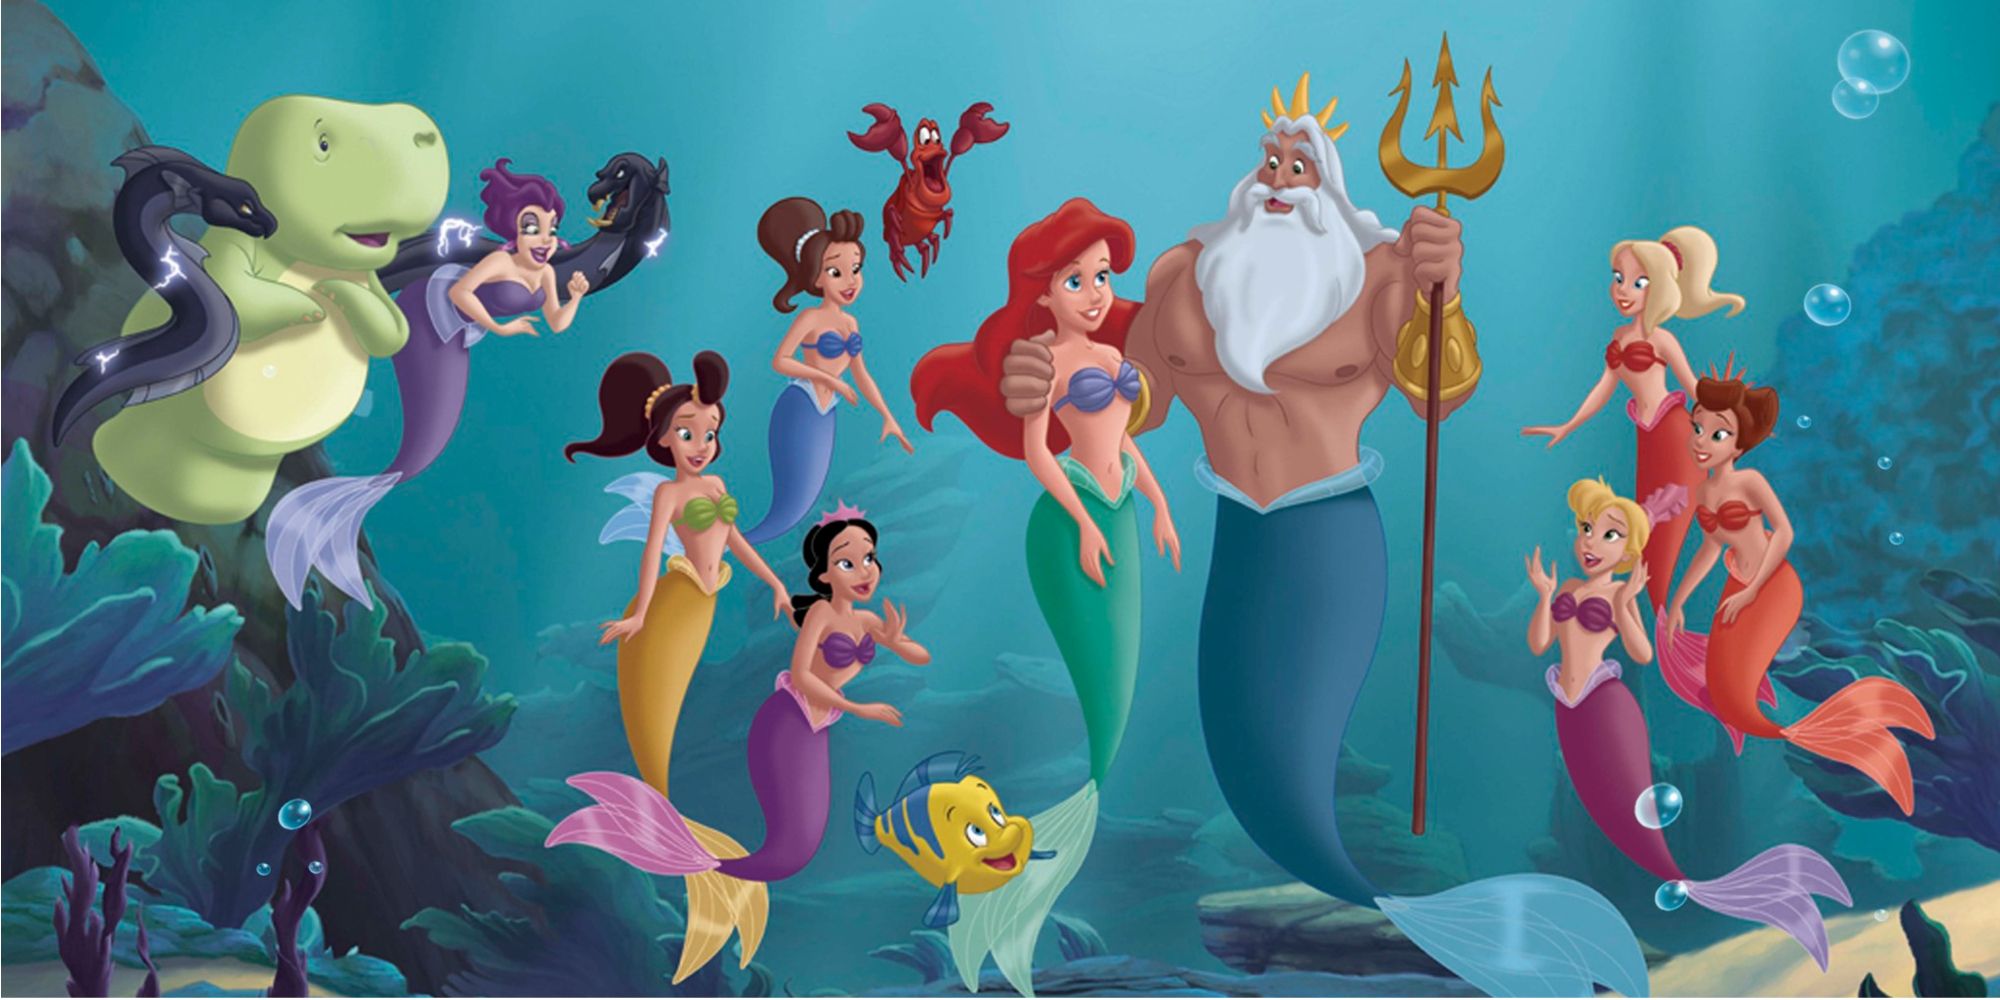 Ariel and King Triton smiling as Flounder, Sebastian, and Ariel's sisters surround them in The Little Mermaid 3: Ariel's Beginning